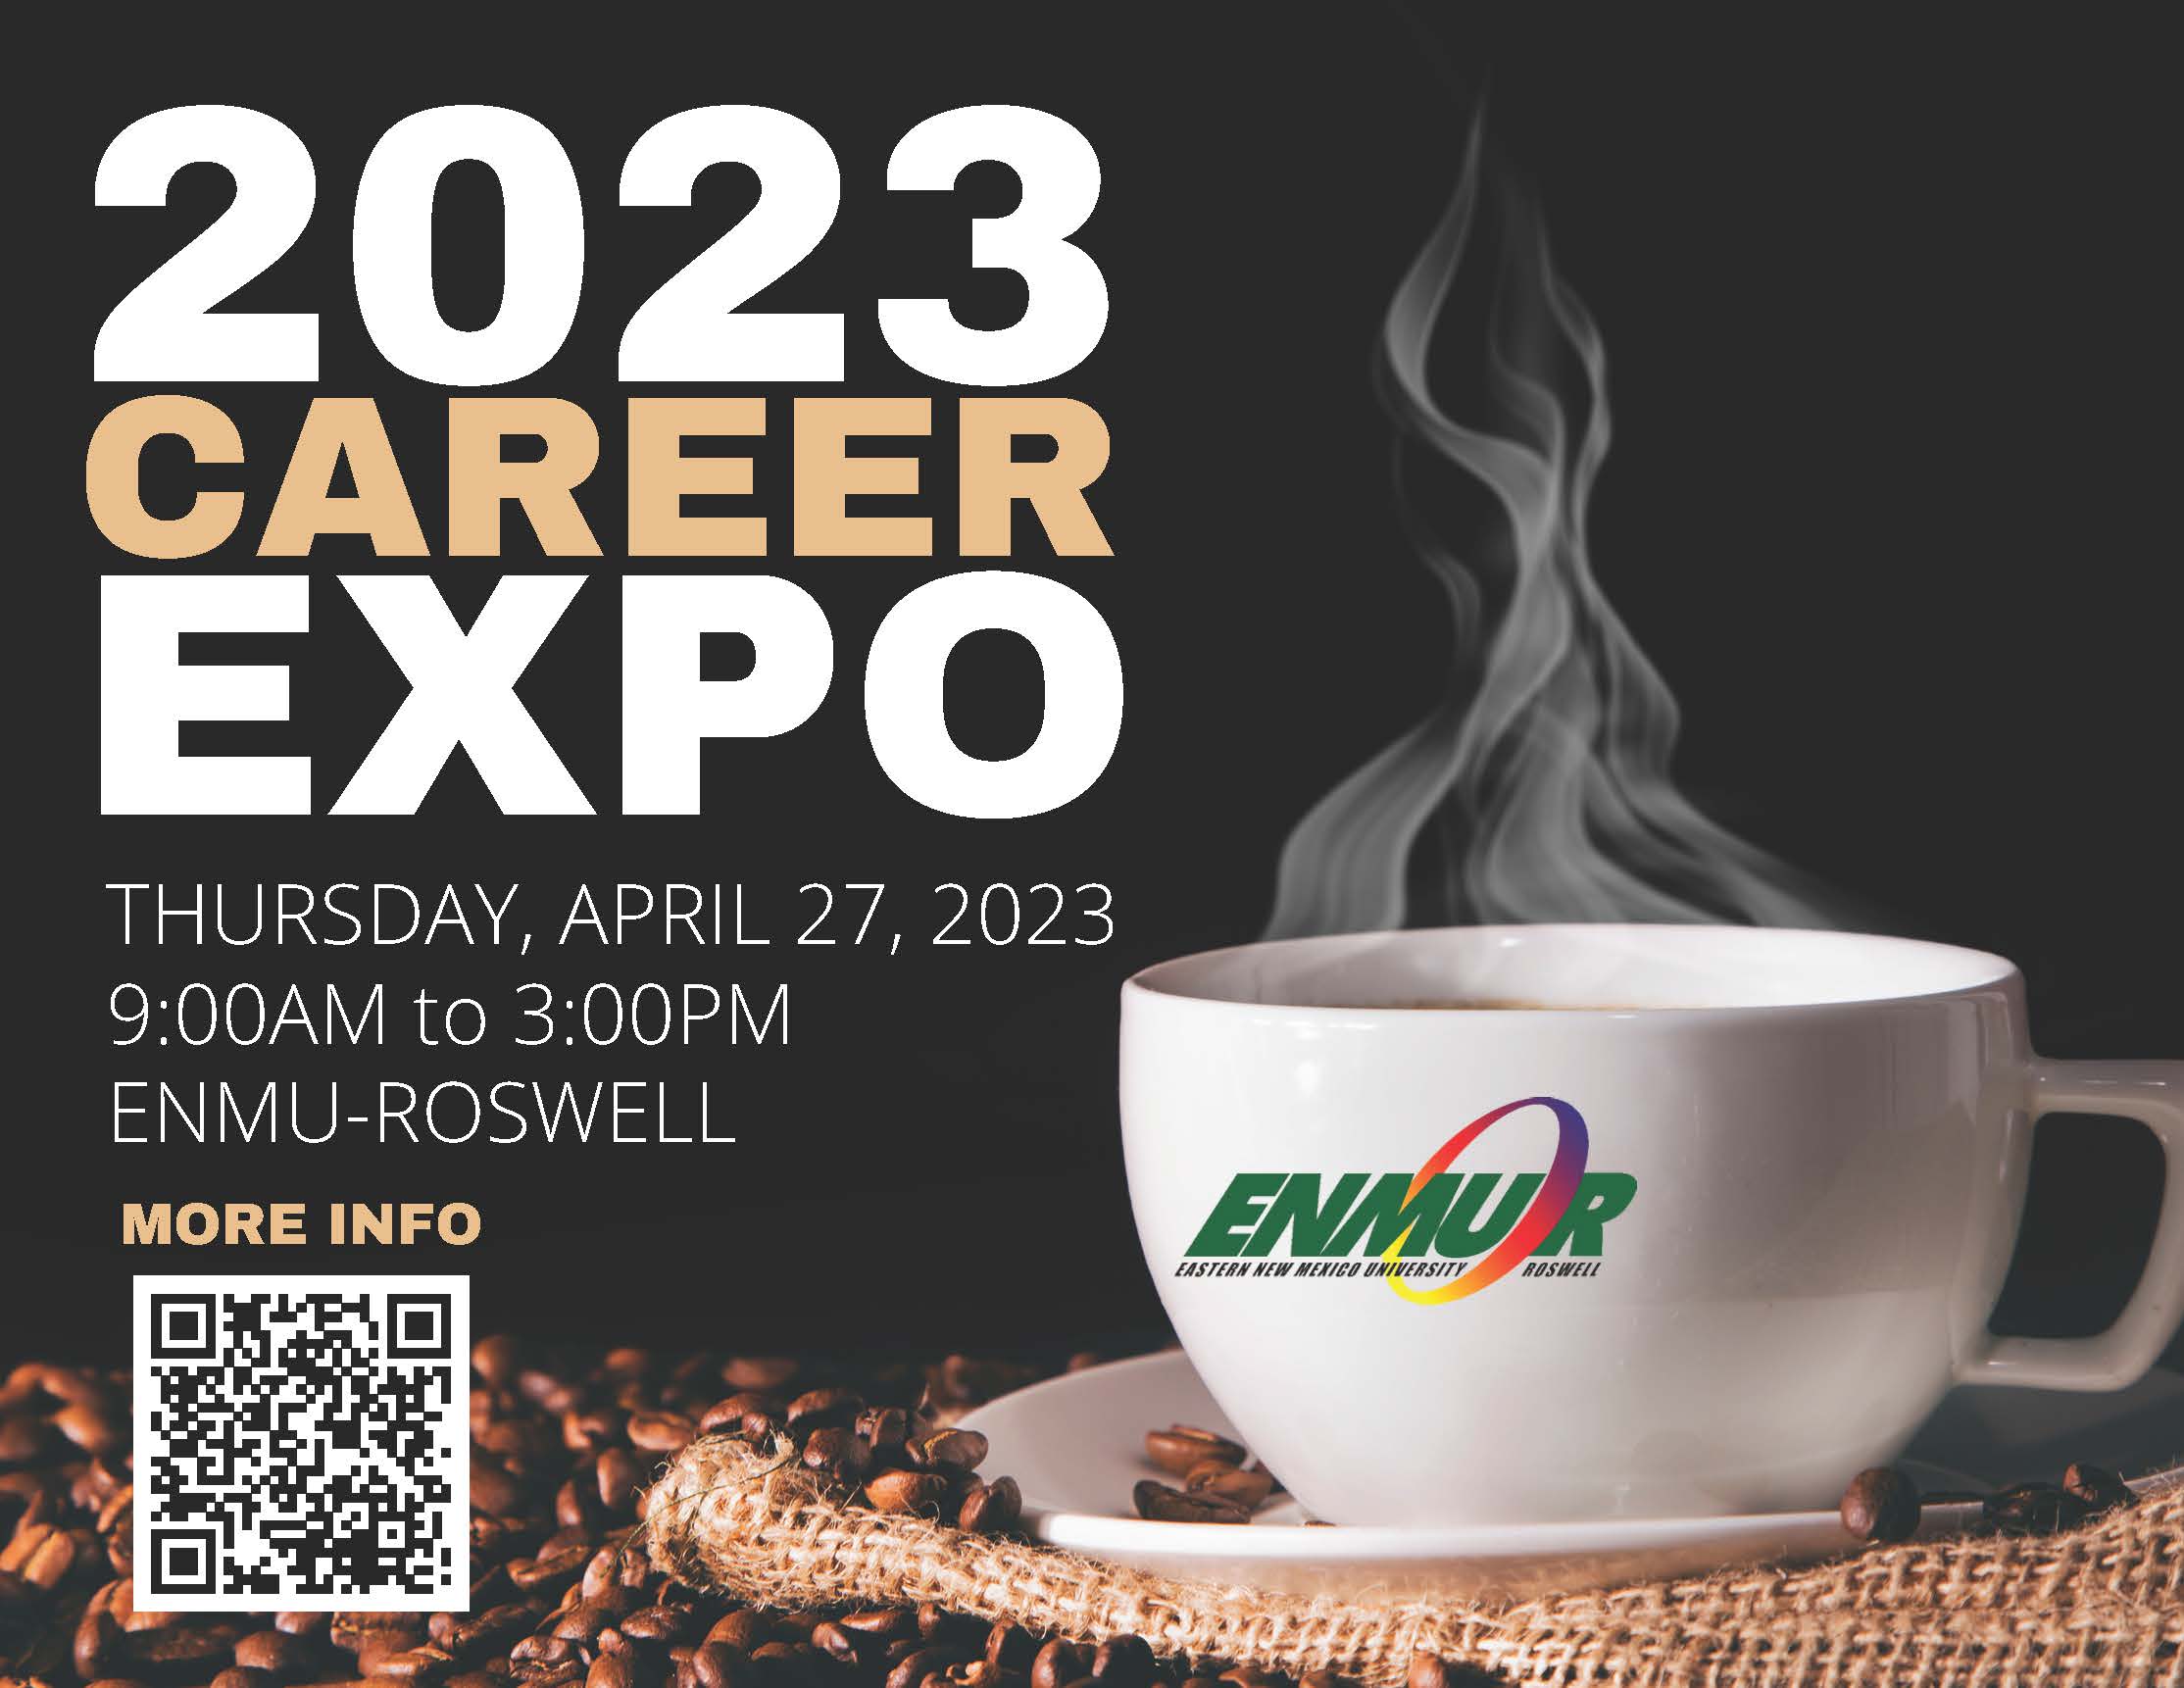 ENMU-Roswell Career EXPO Invite